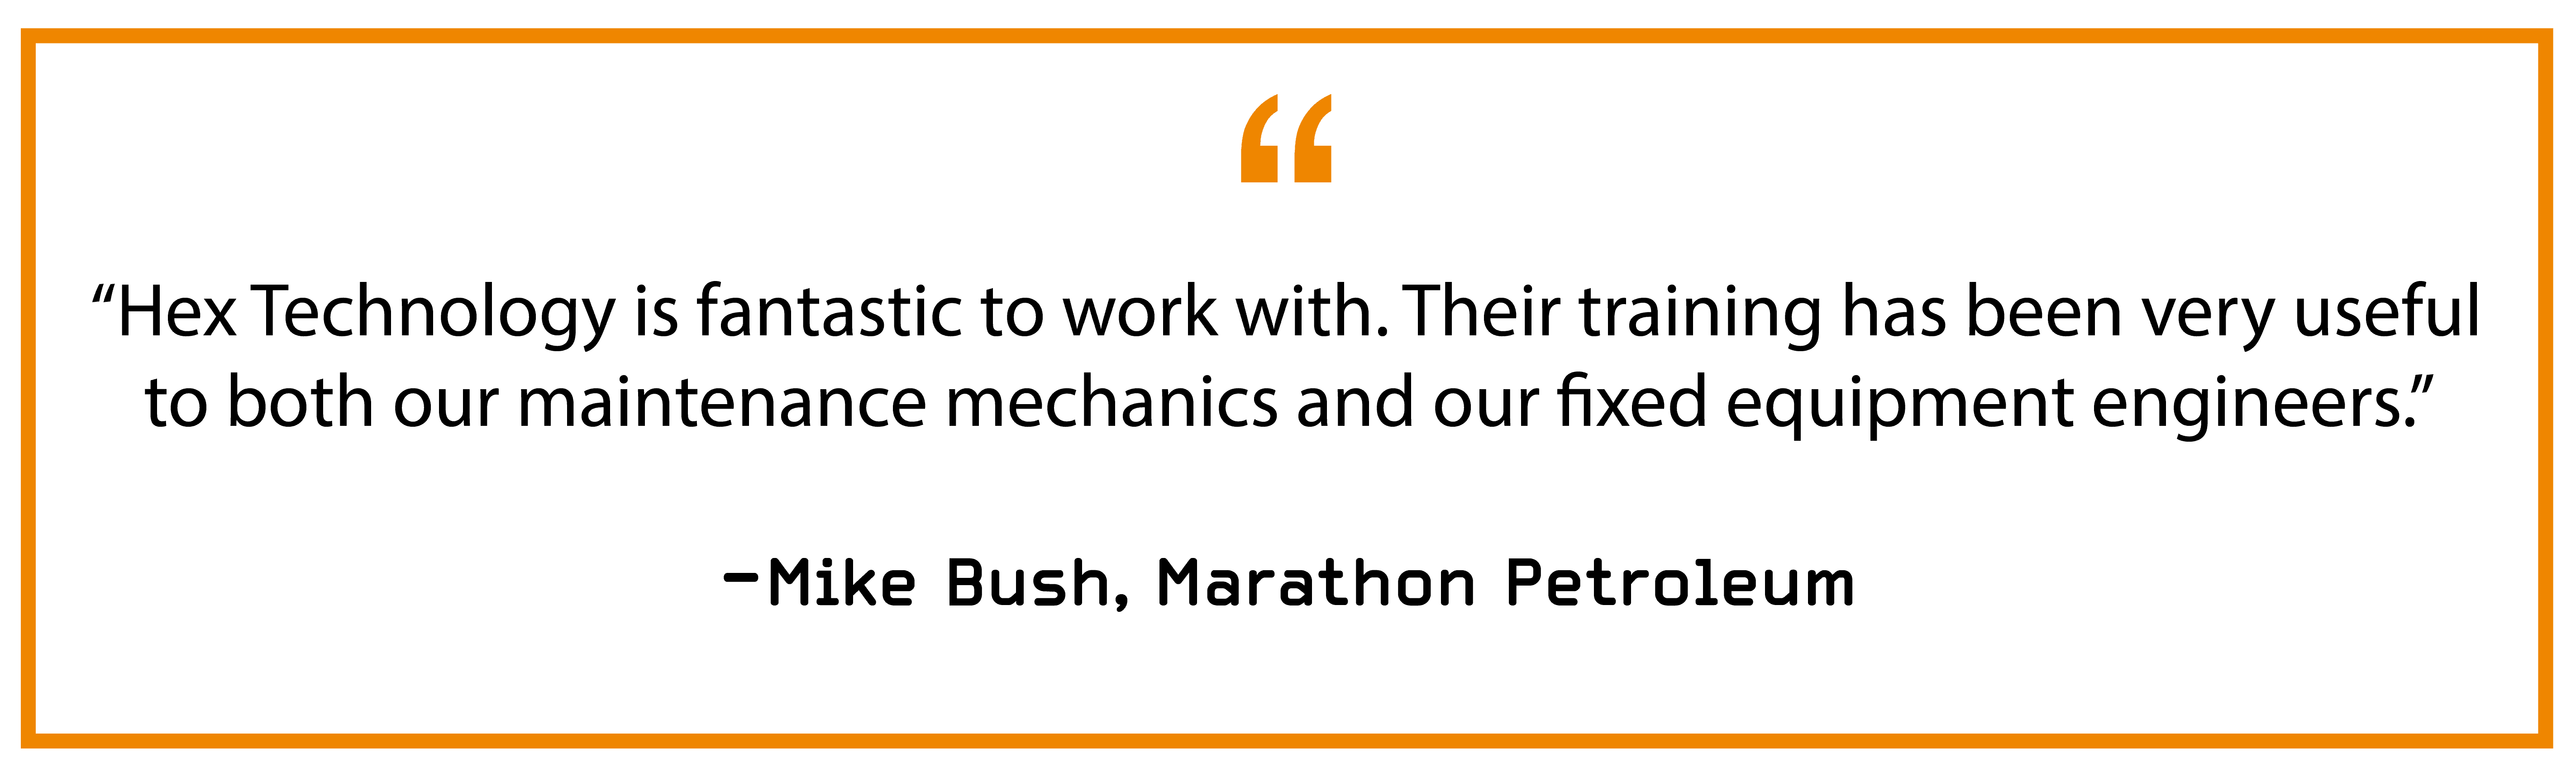 “Hex Technology is fantastic to work with. Their training has been very useful to both our maintenance mechanics and our fixed equipment engineers.” — Mike Bush, Marathon Petroleum